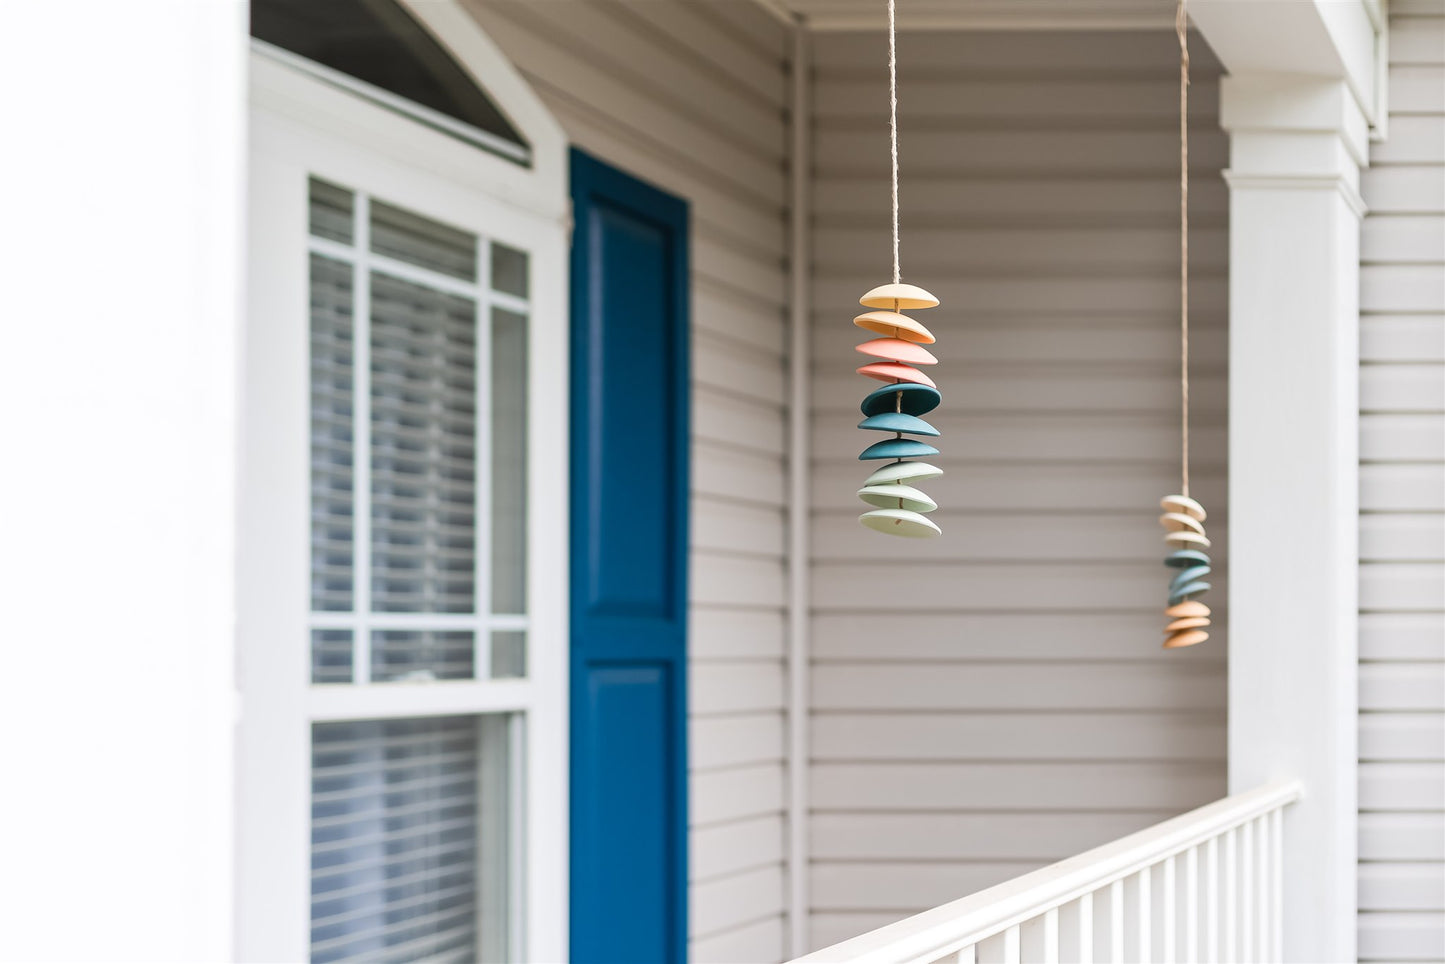 Ceramic chimes in light yellow, coral, teal, seafoam